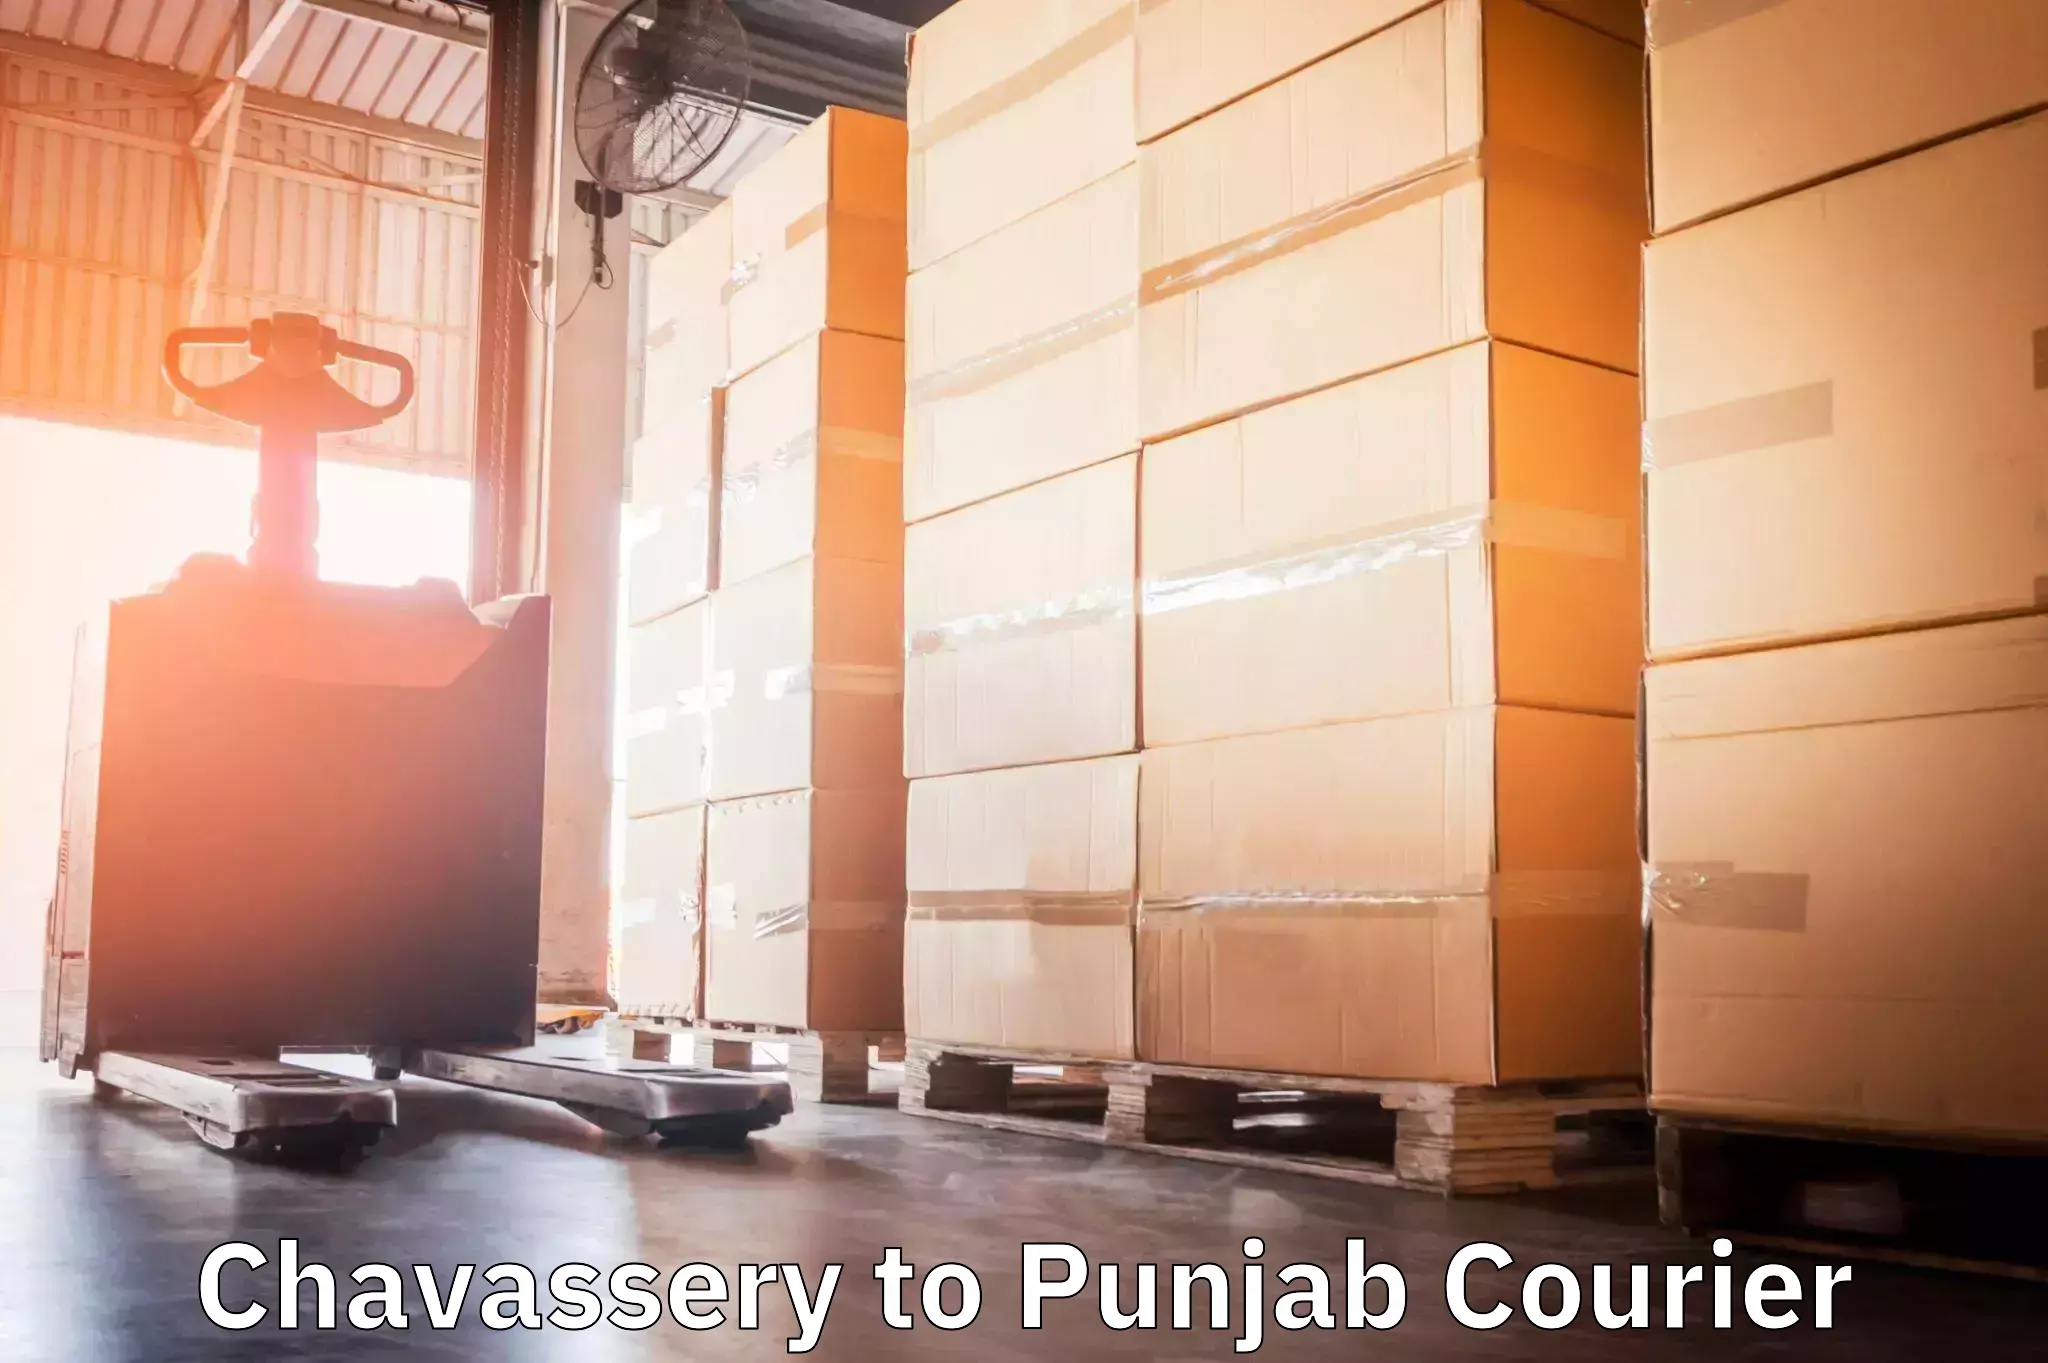 Express mail solutions Chavassery to Punjab